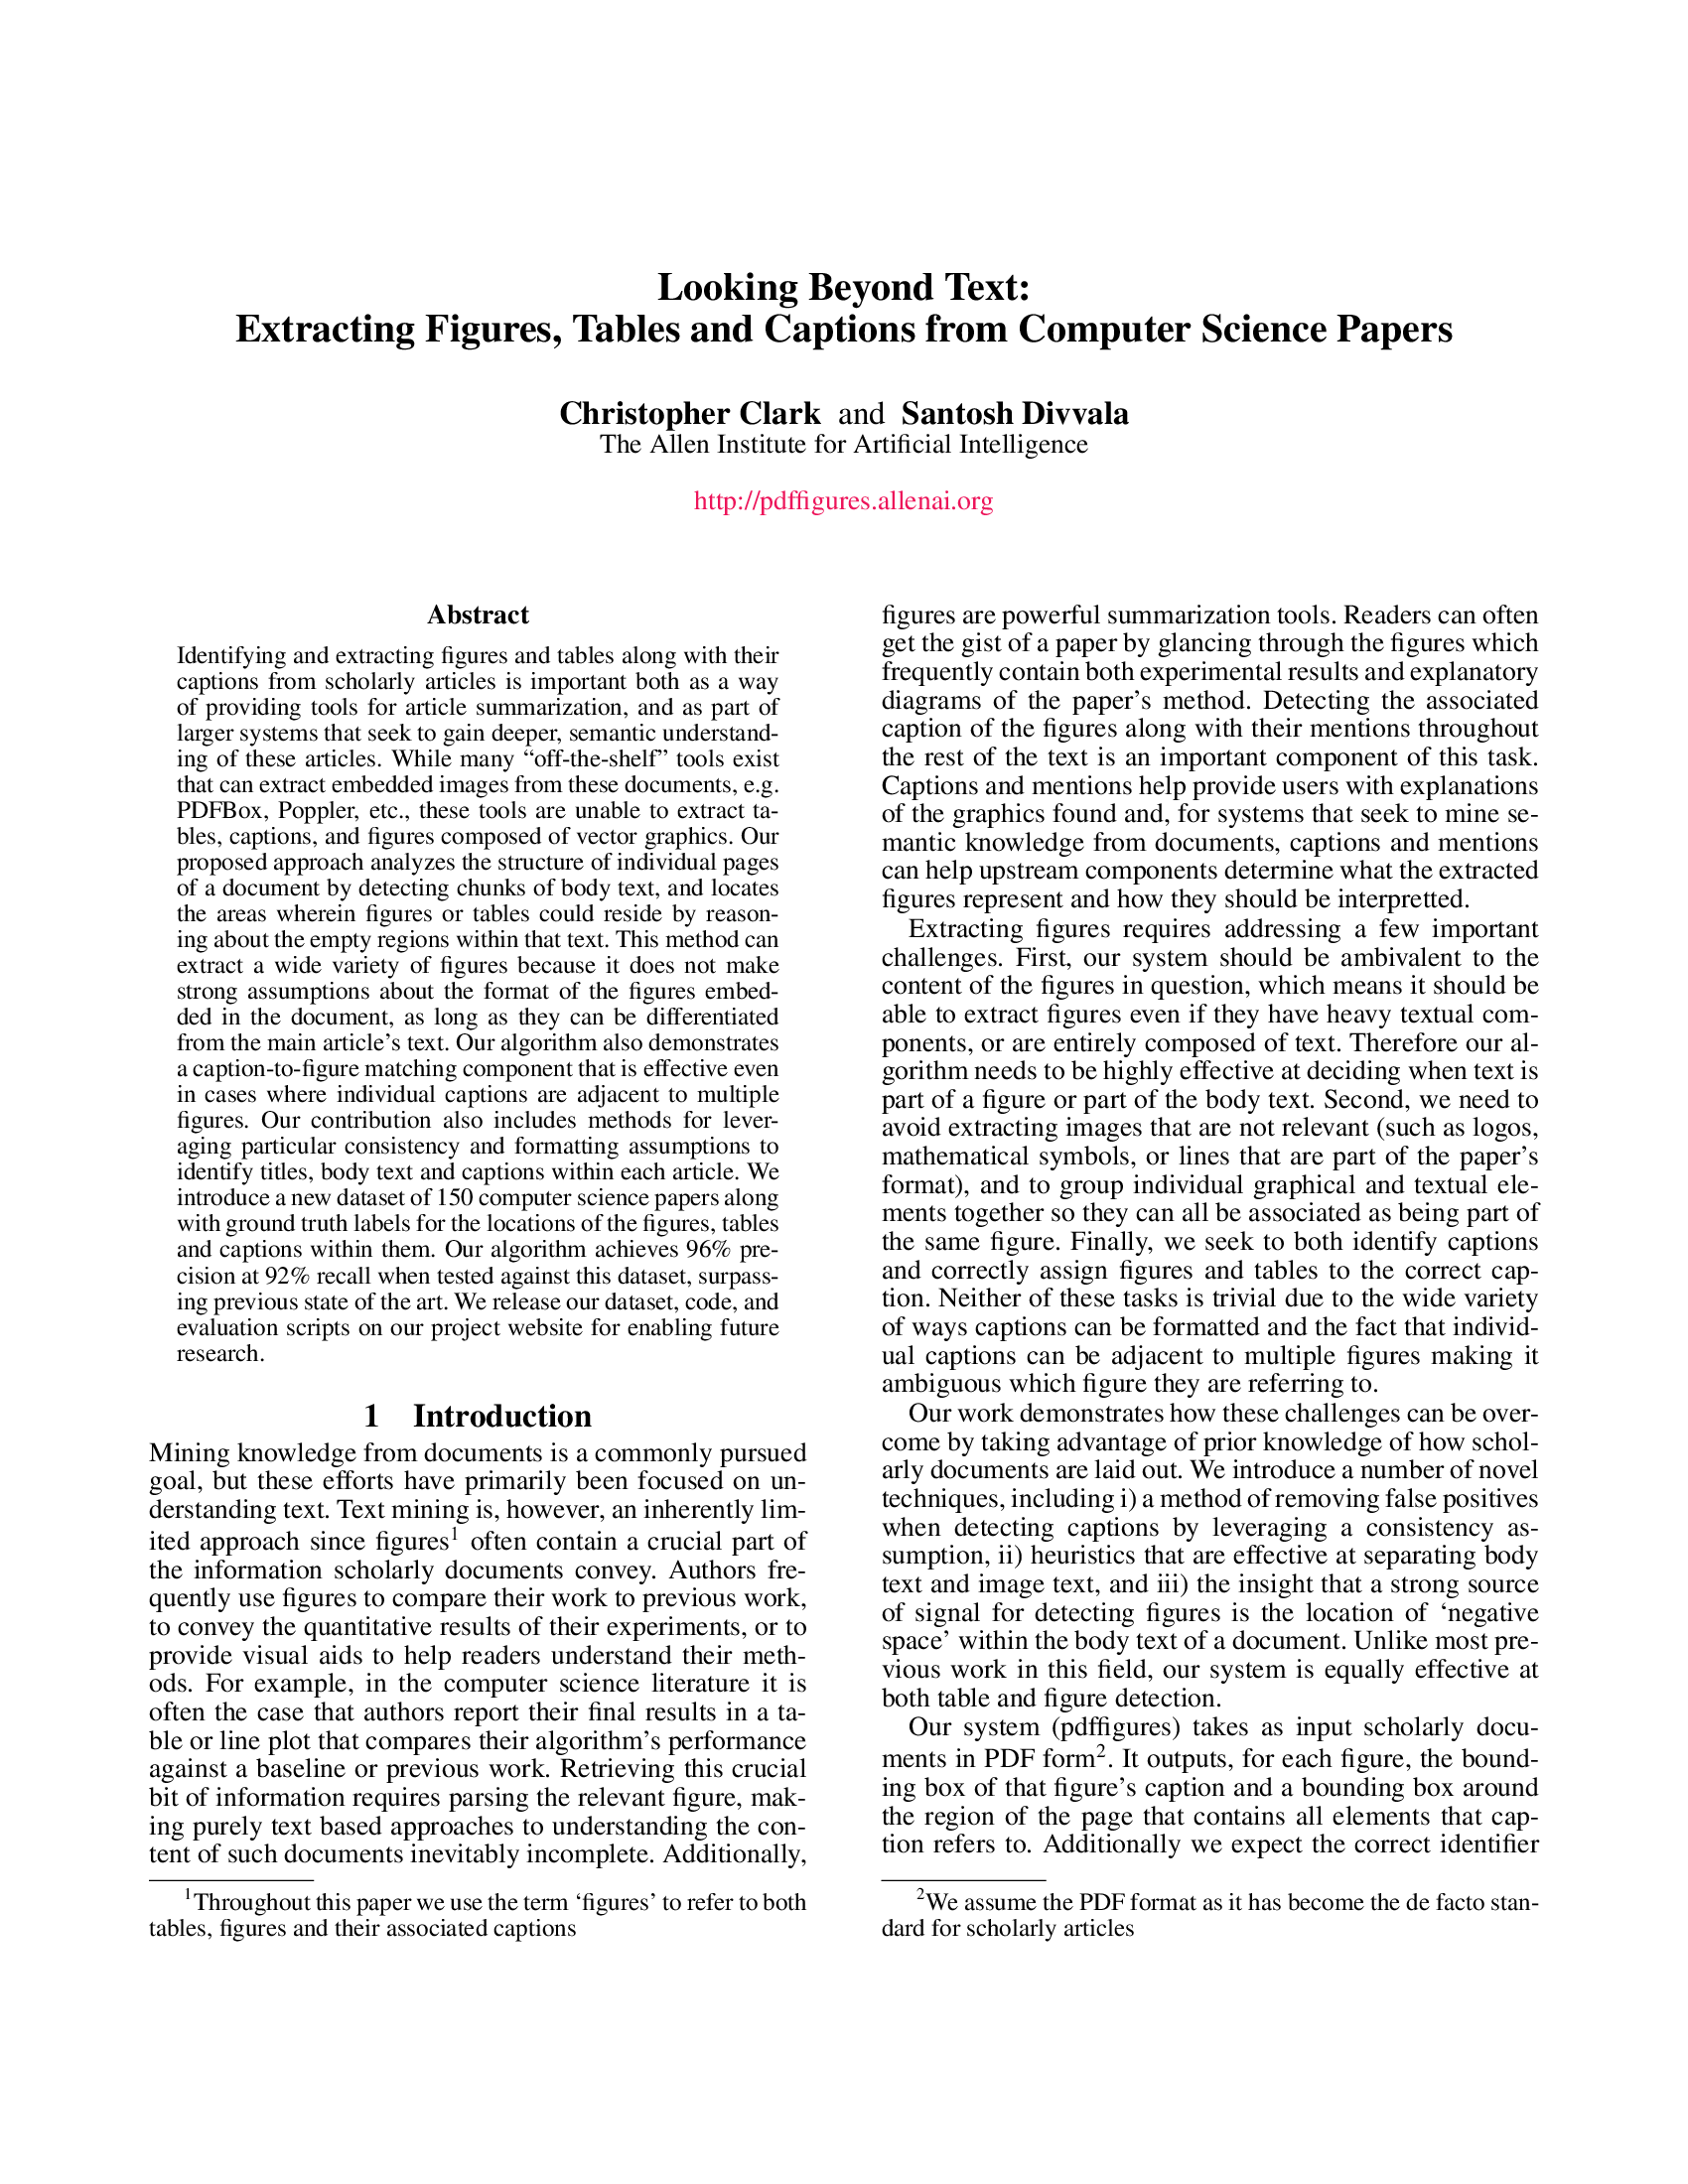 Looking Beyond Text: Extracting Figures, Tables and Captions from Computer Science Papers